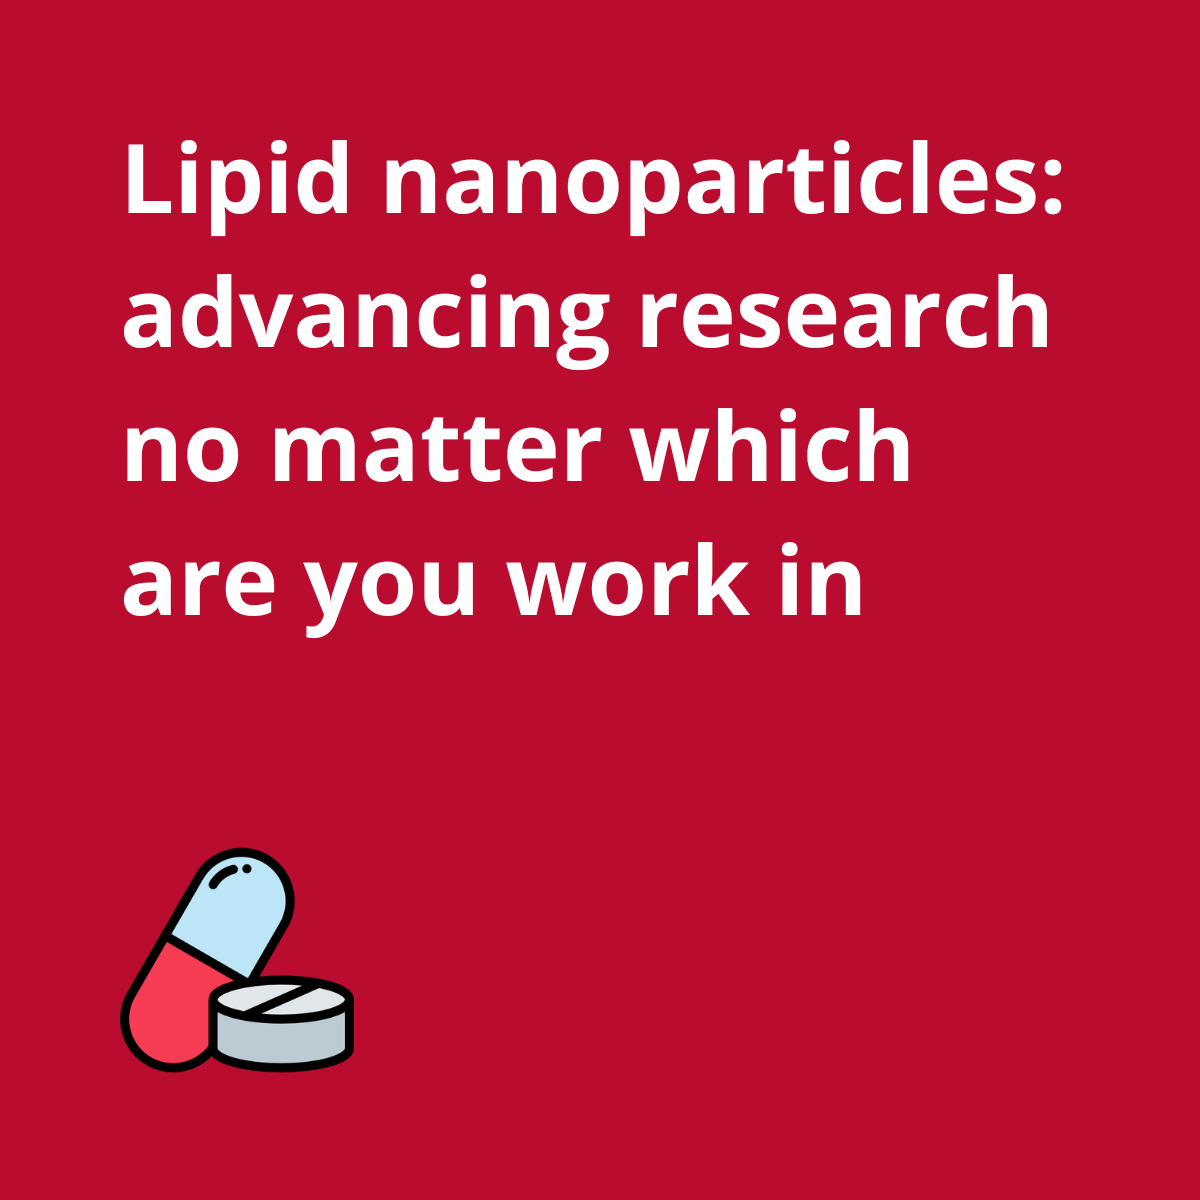 Lipid nanoparticles advancing your research, no matter which area you work in